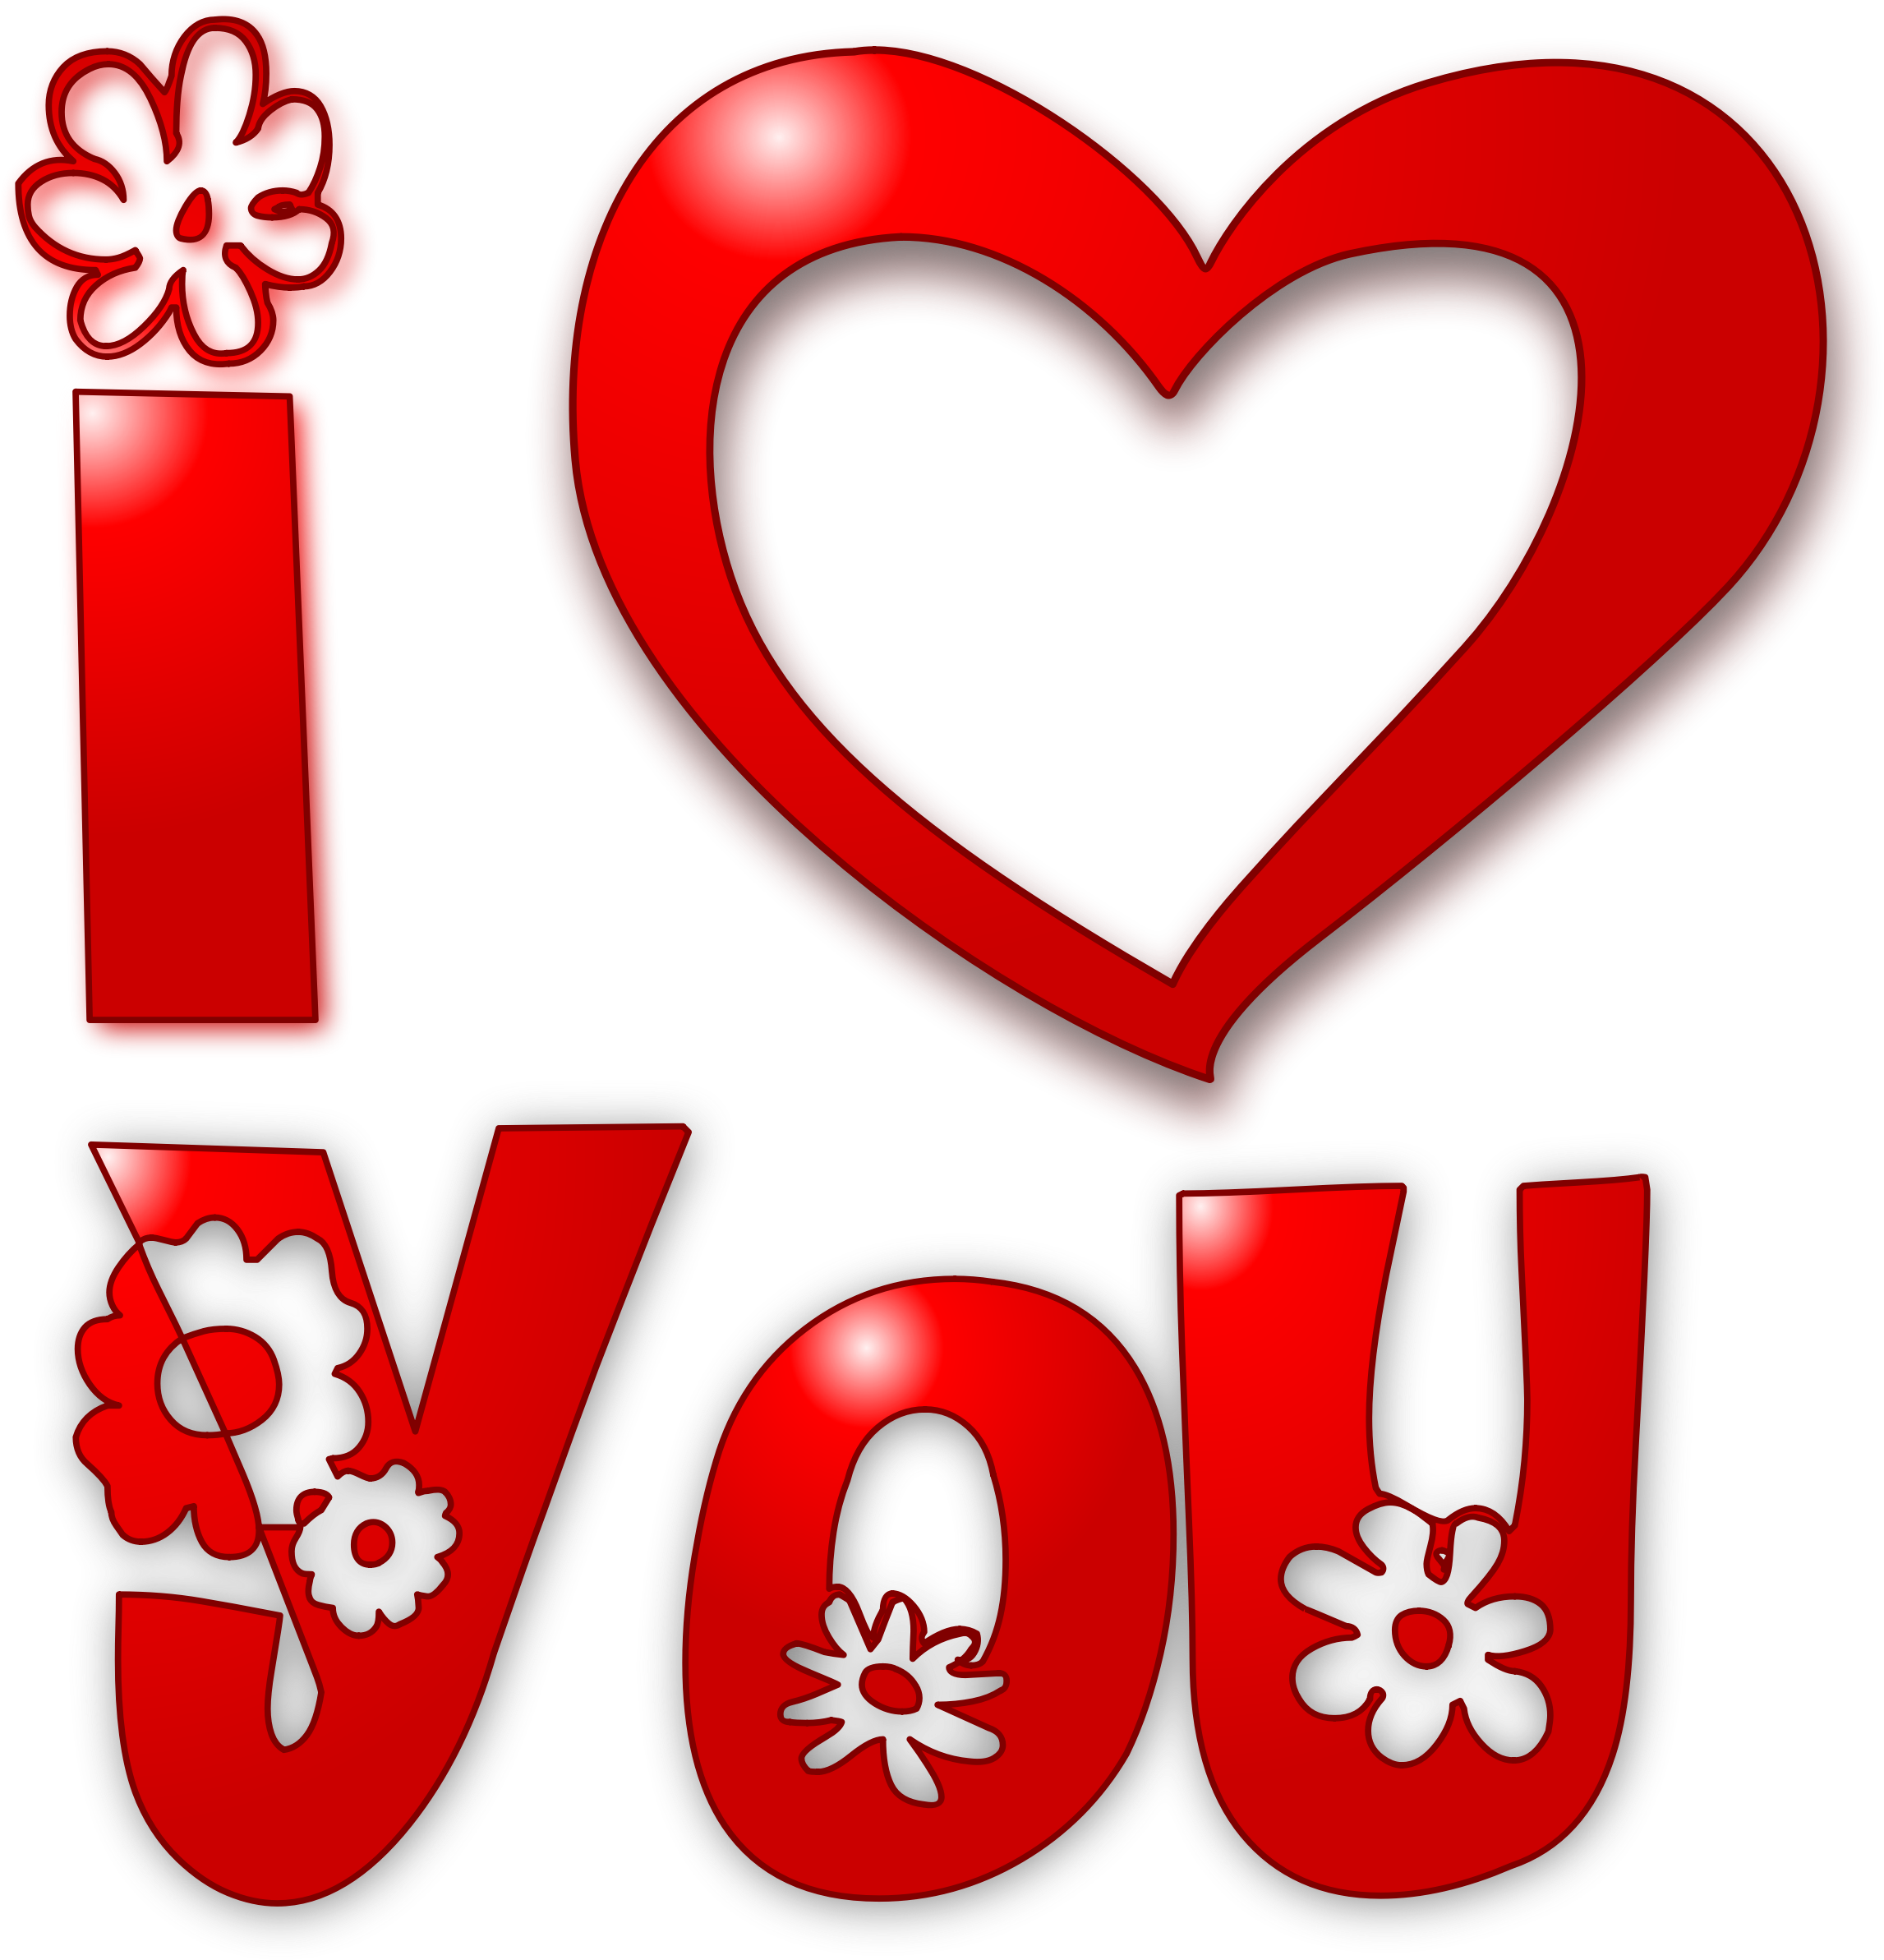 Love PNG HD. I Love You Image